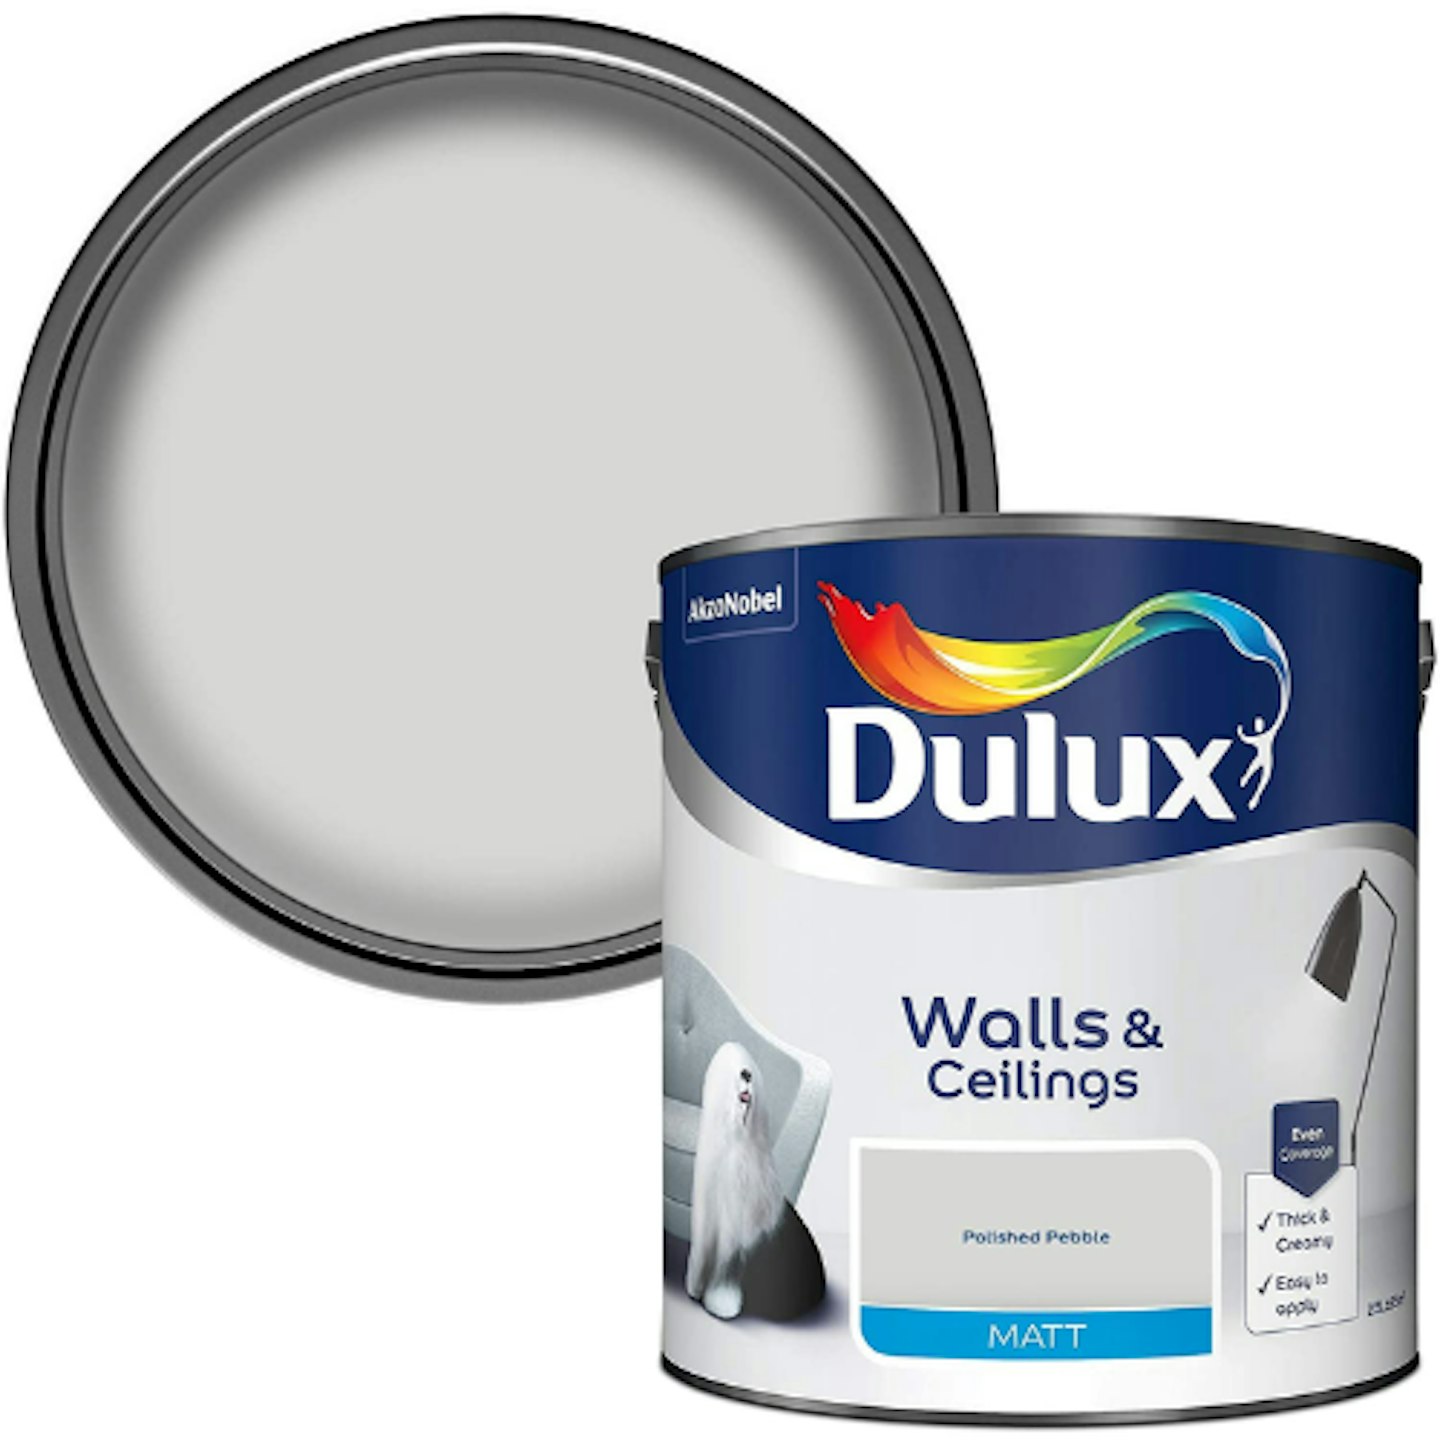 Dulux Polished Pebble Matt Emulsion Paint For Walls And Ceilings, 2.5L